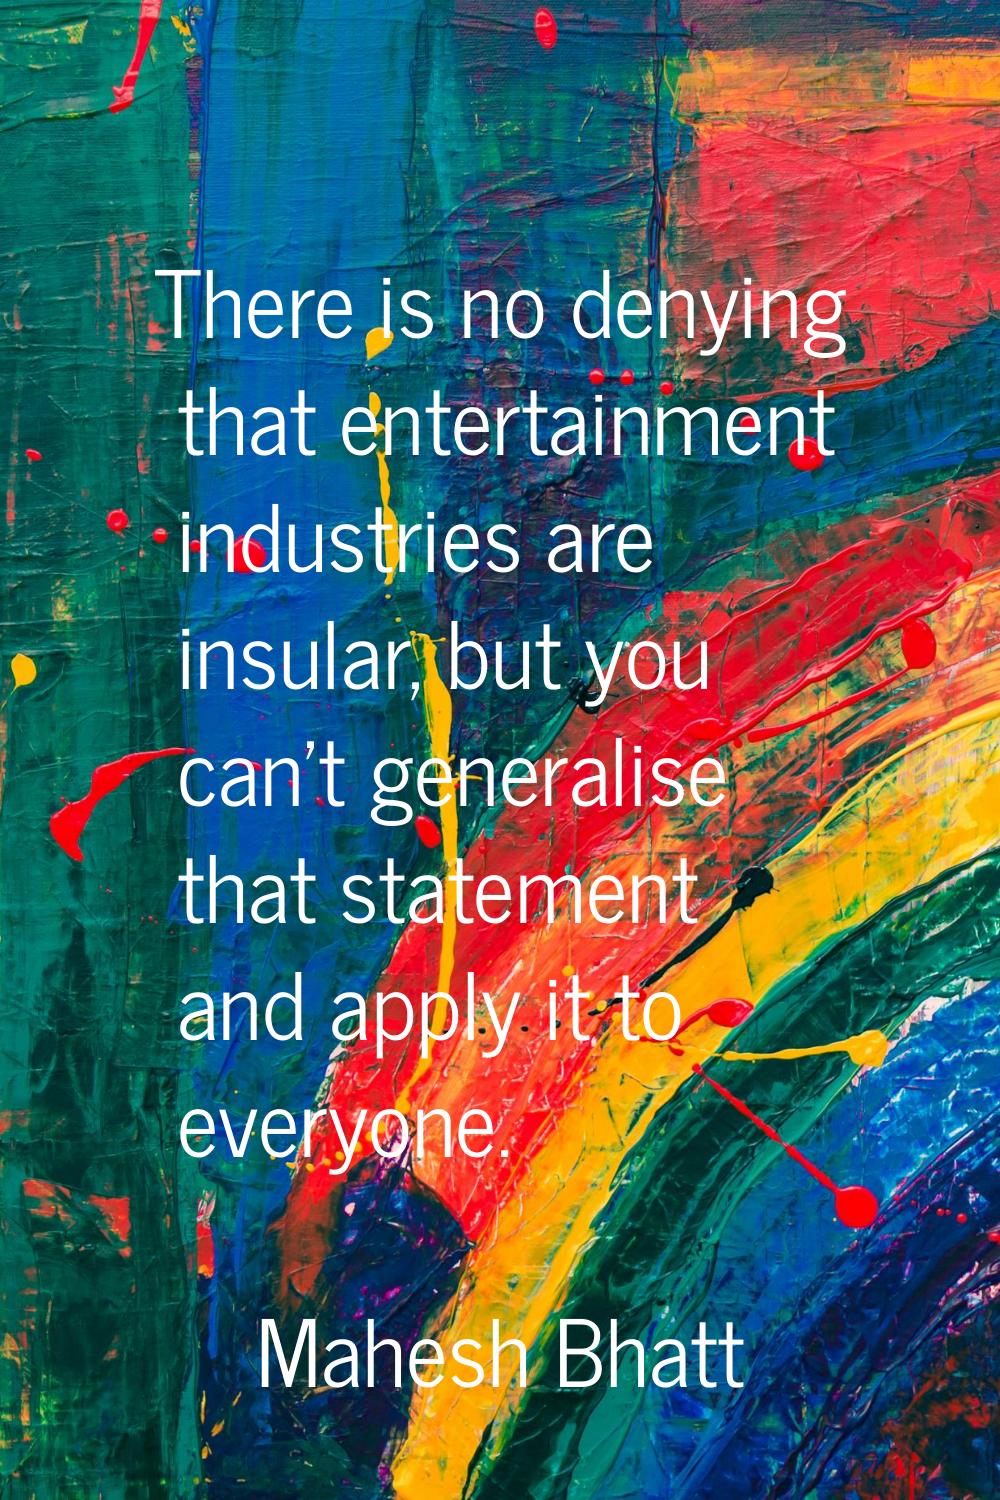 There is no denying that entertainment industries are insular, but you can't generalise that statem